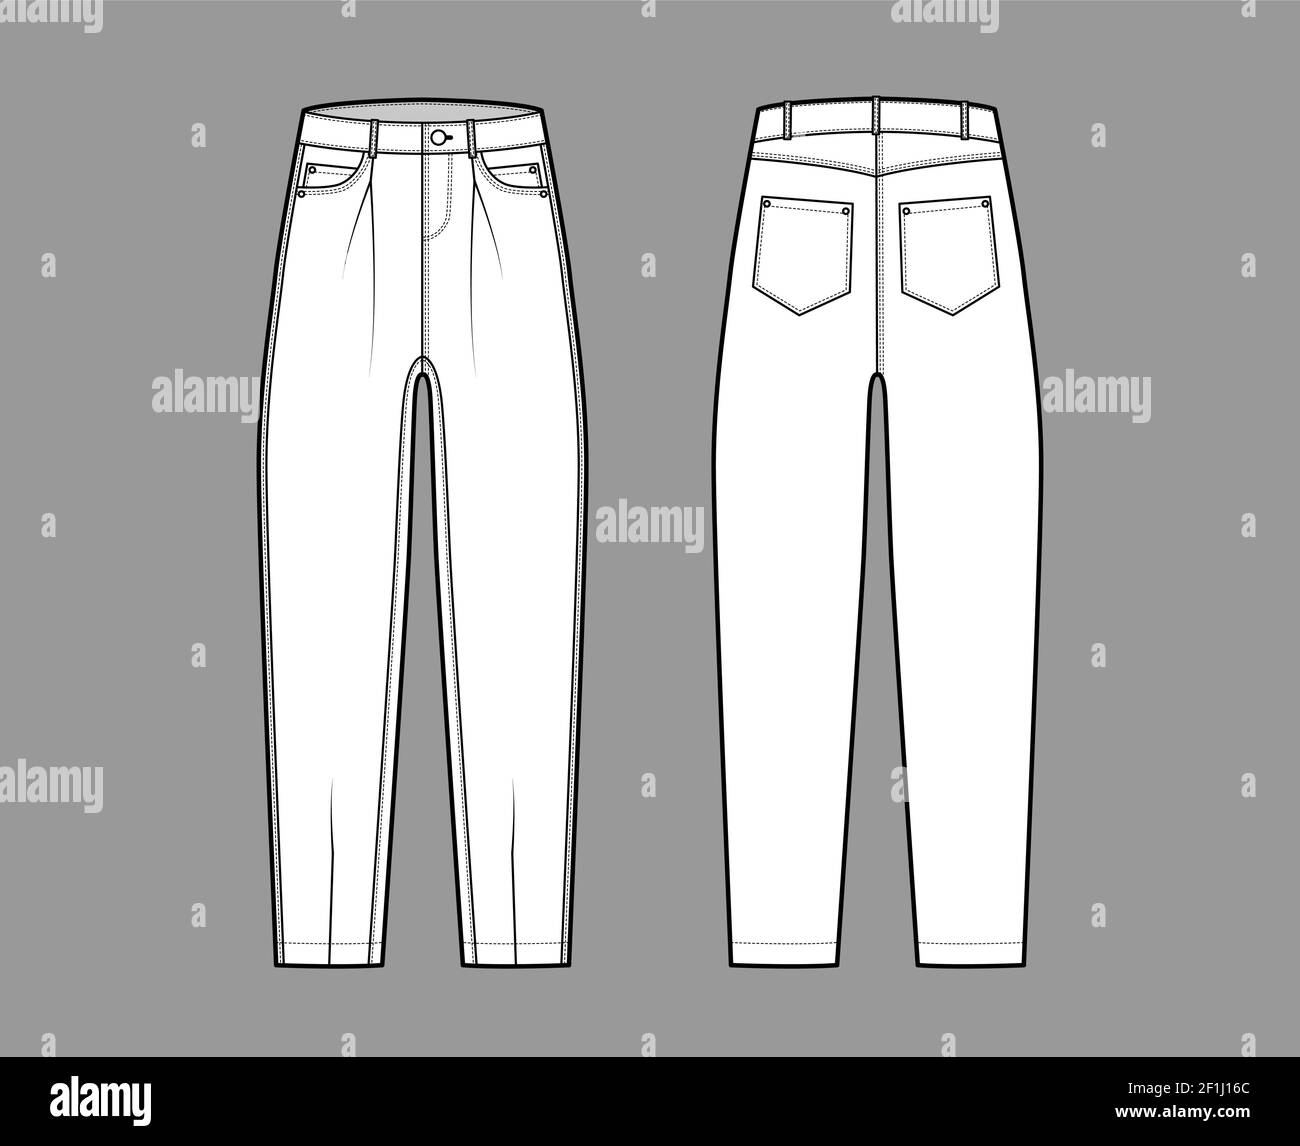 Slouchy Jeans Denim pants technical fashion illustration with full length,  low waist, rise, 5 pockets, Rivets,